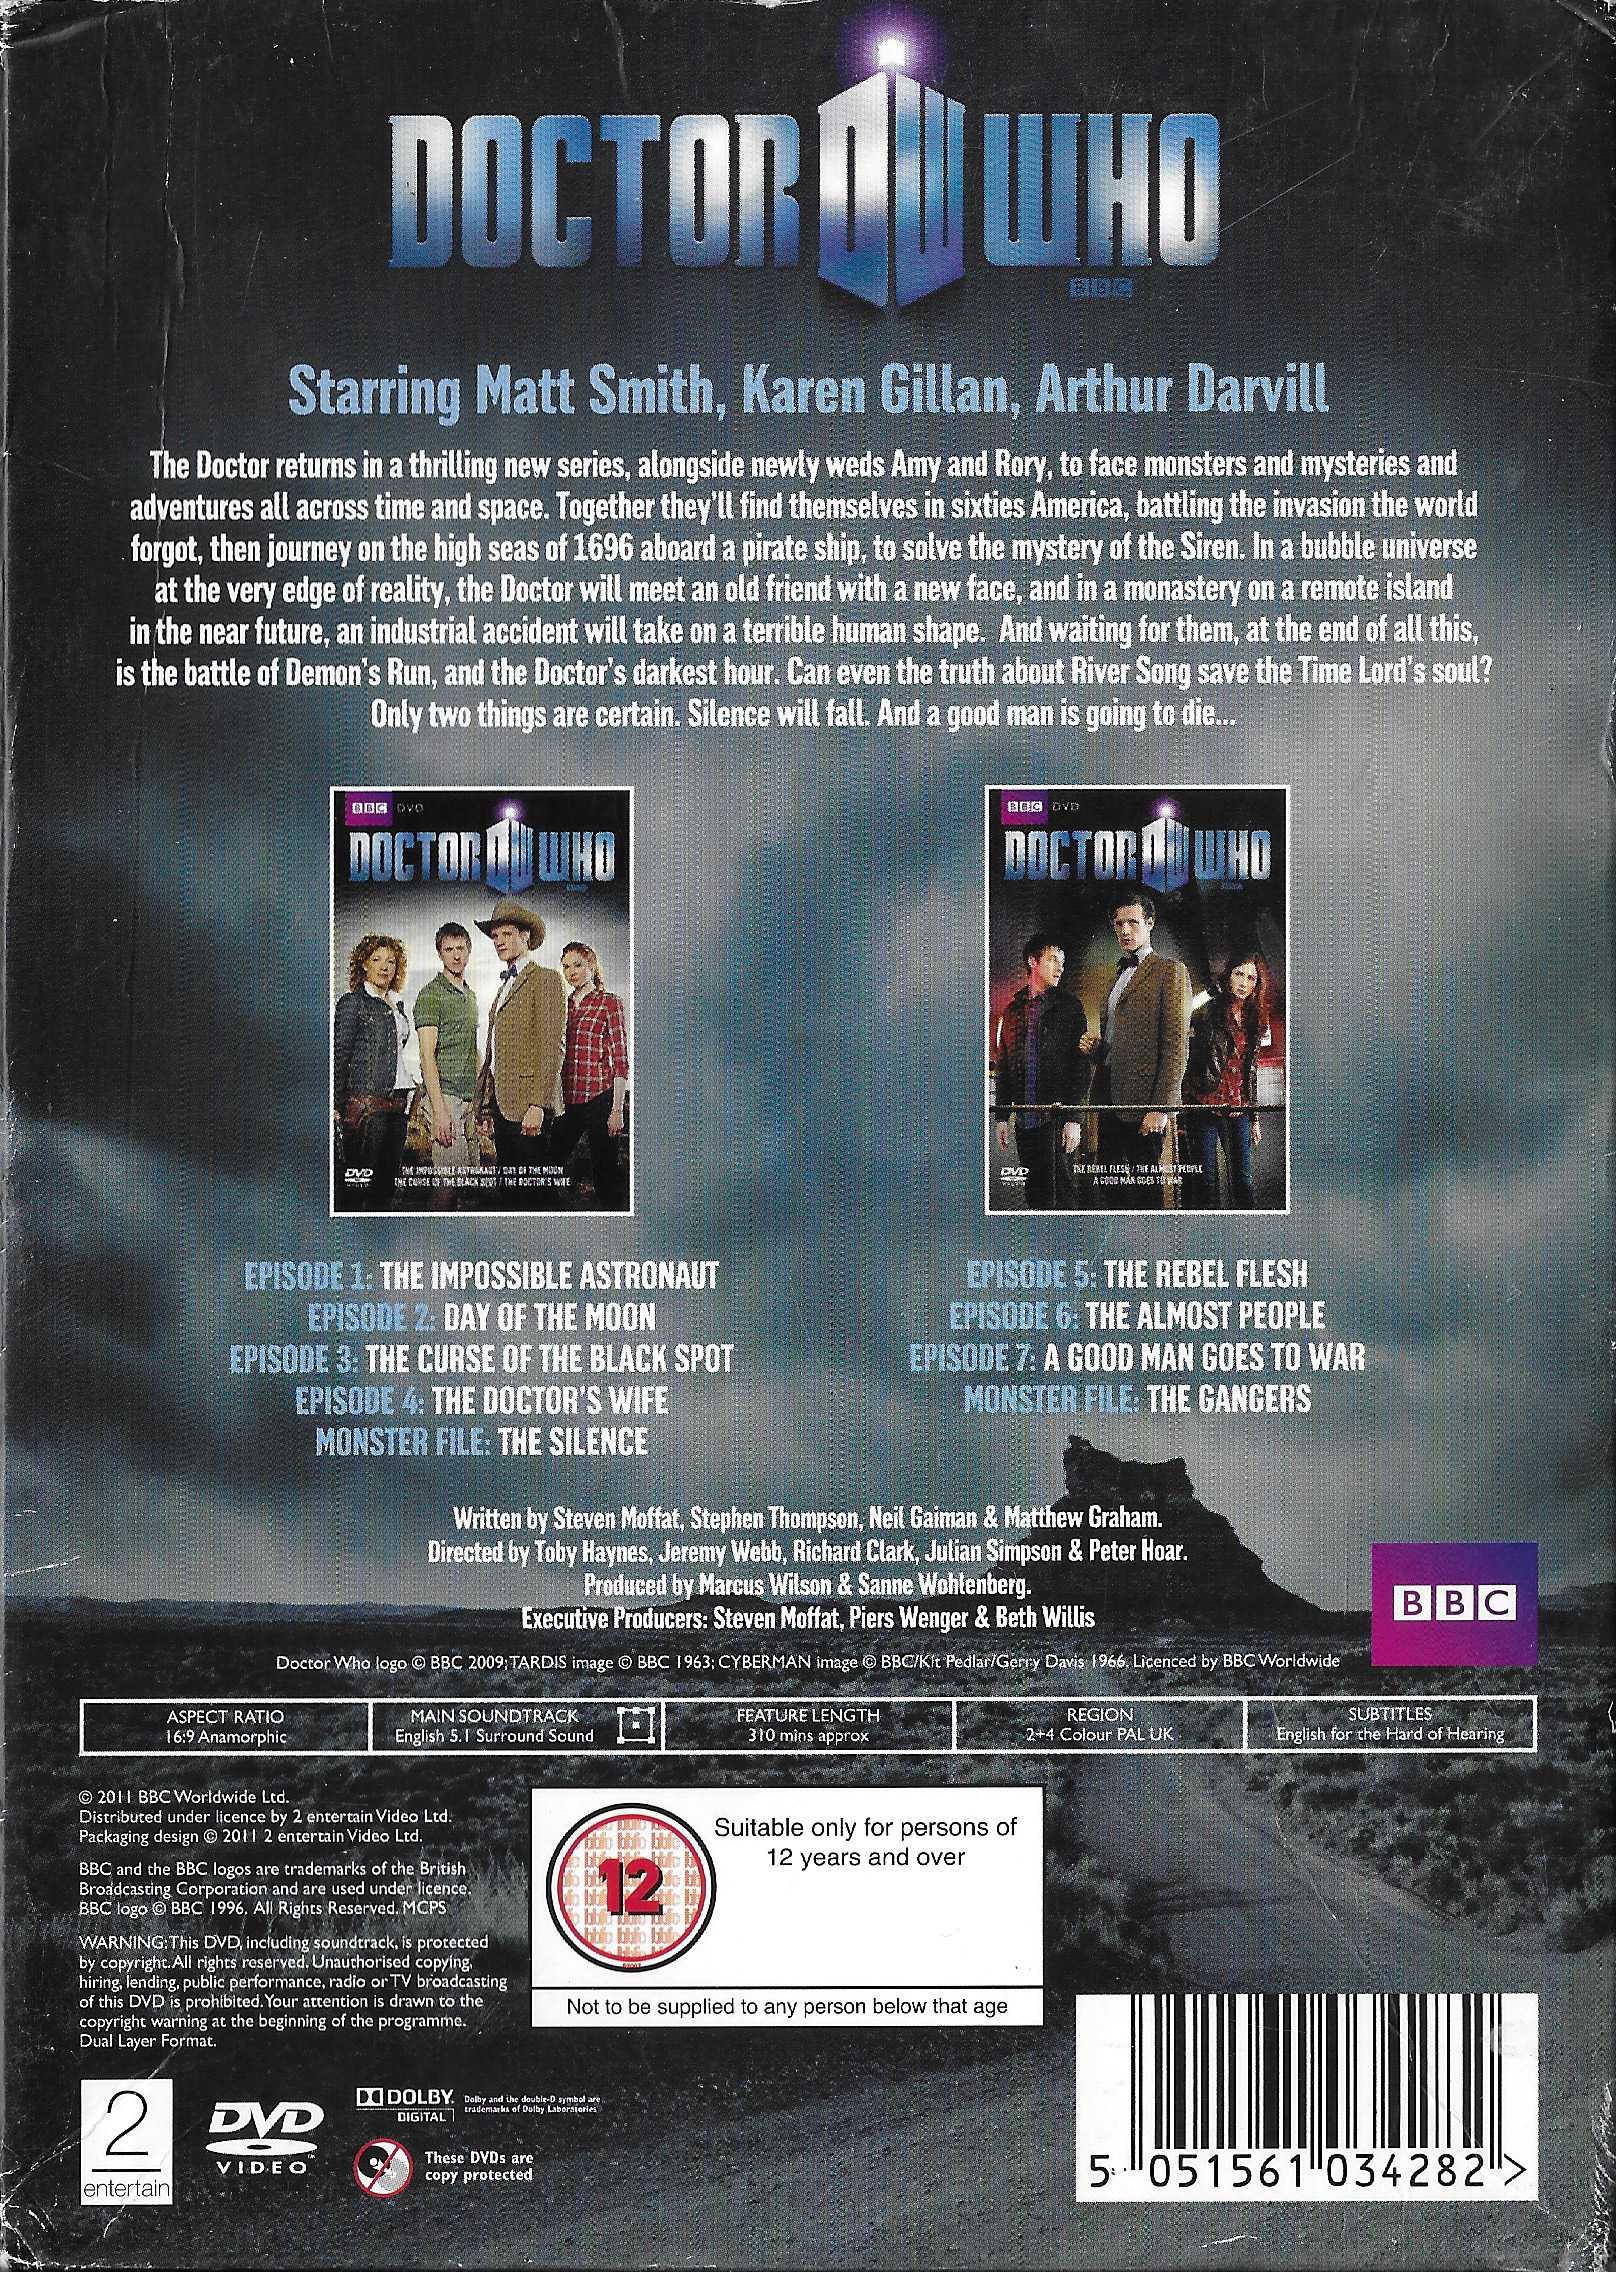 Picture of BBCDVD 3428 Doctor Who - Series 6, volume 1 by artist Steven Moffat / Stephen Thompson / Neil Gaiman / Matthew Graham from the BBC records and Tapes library